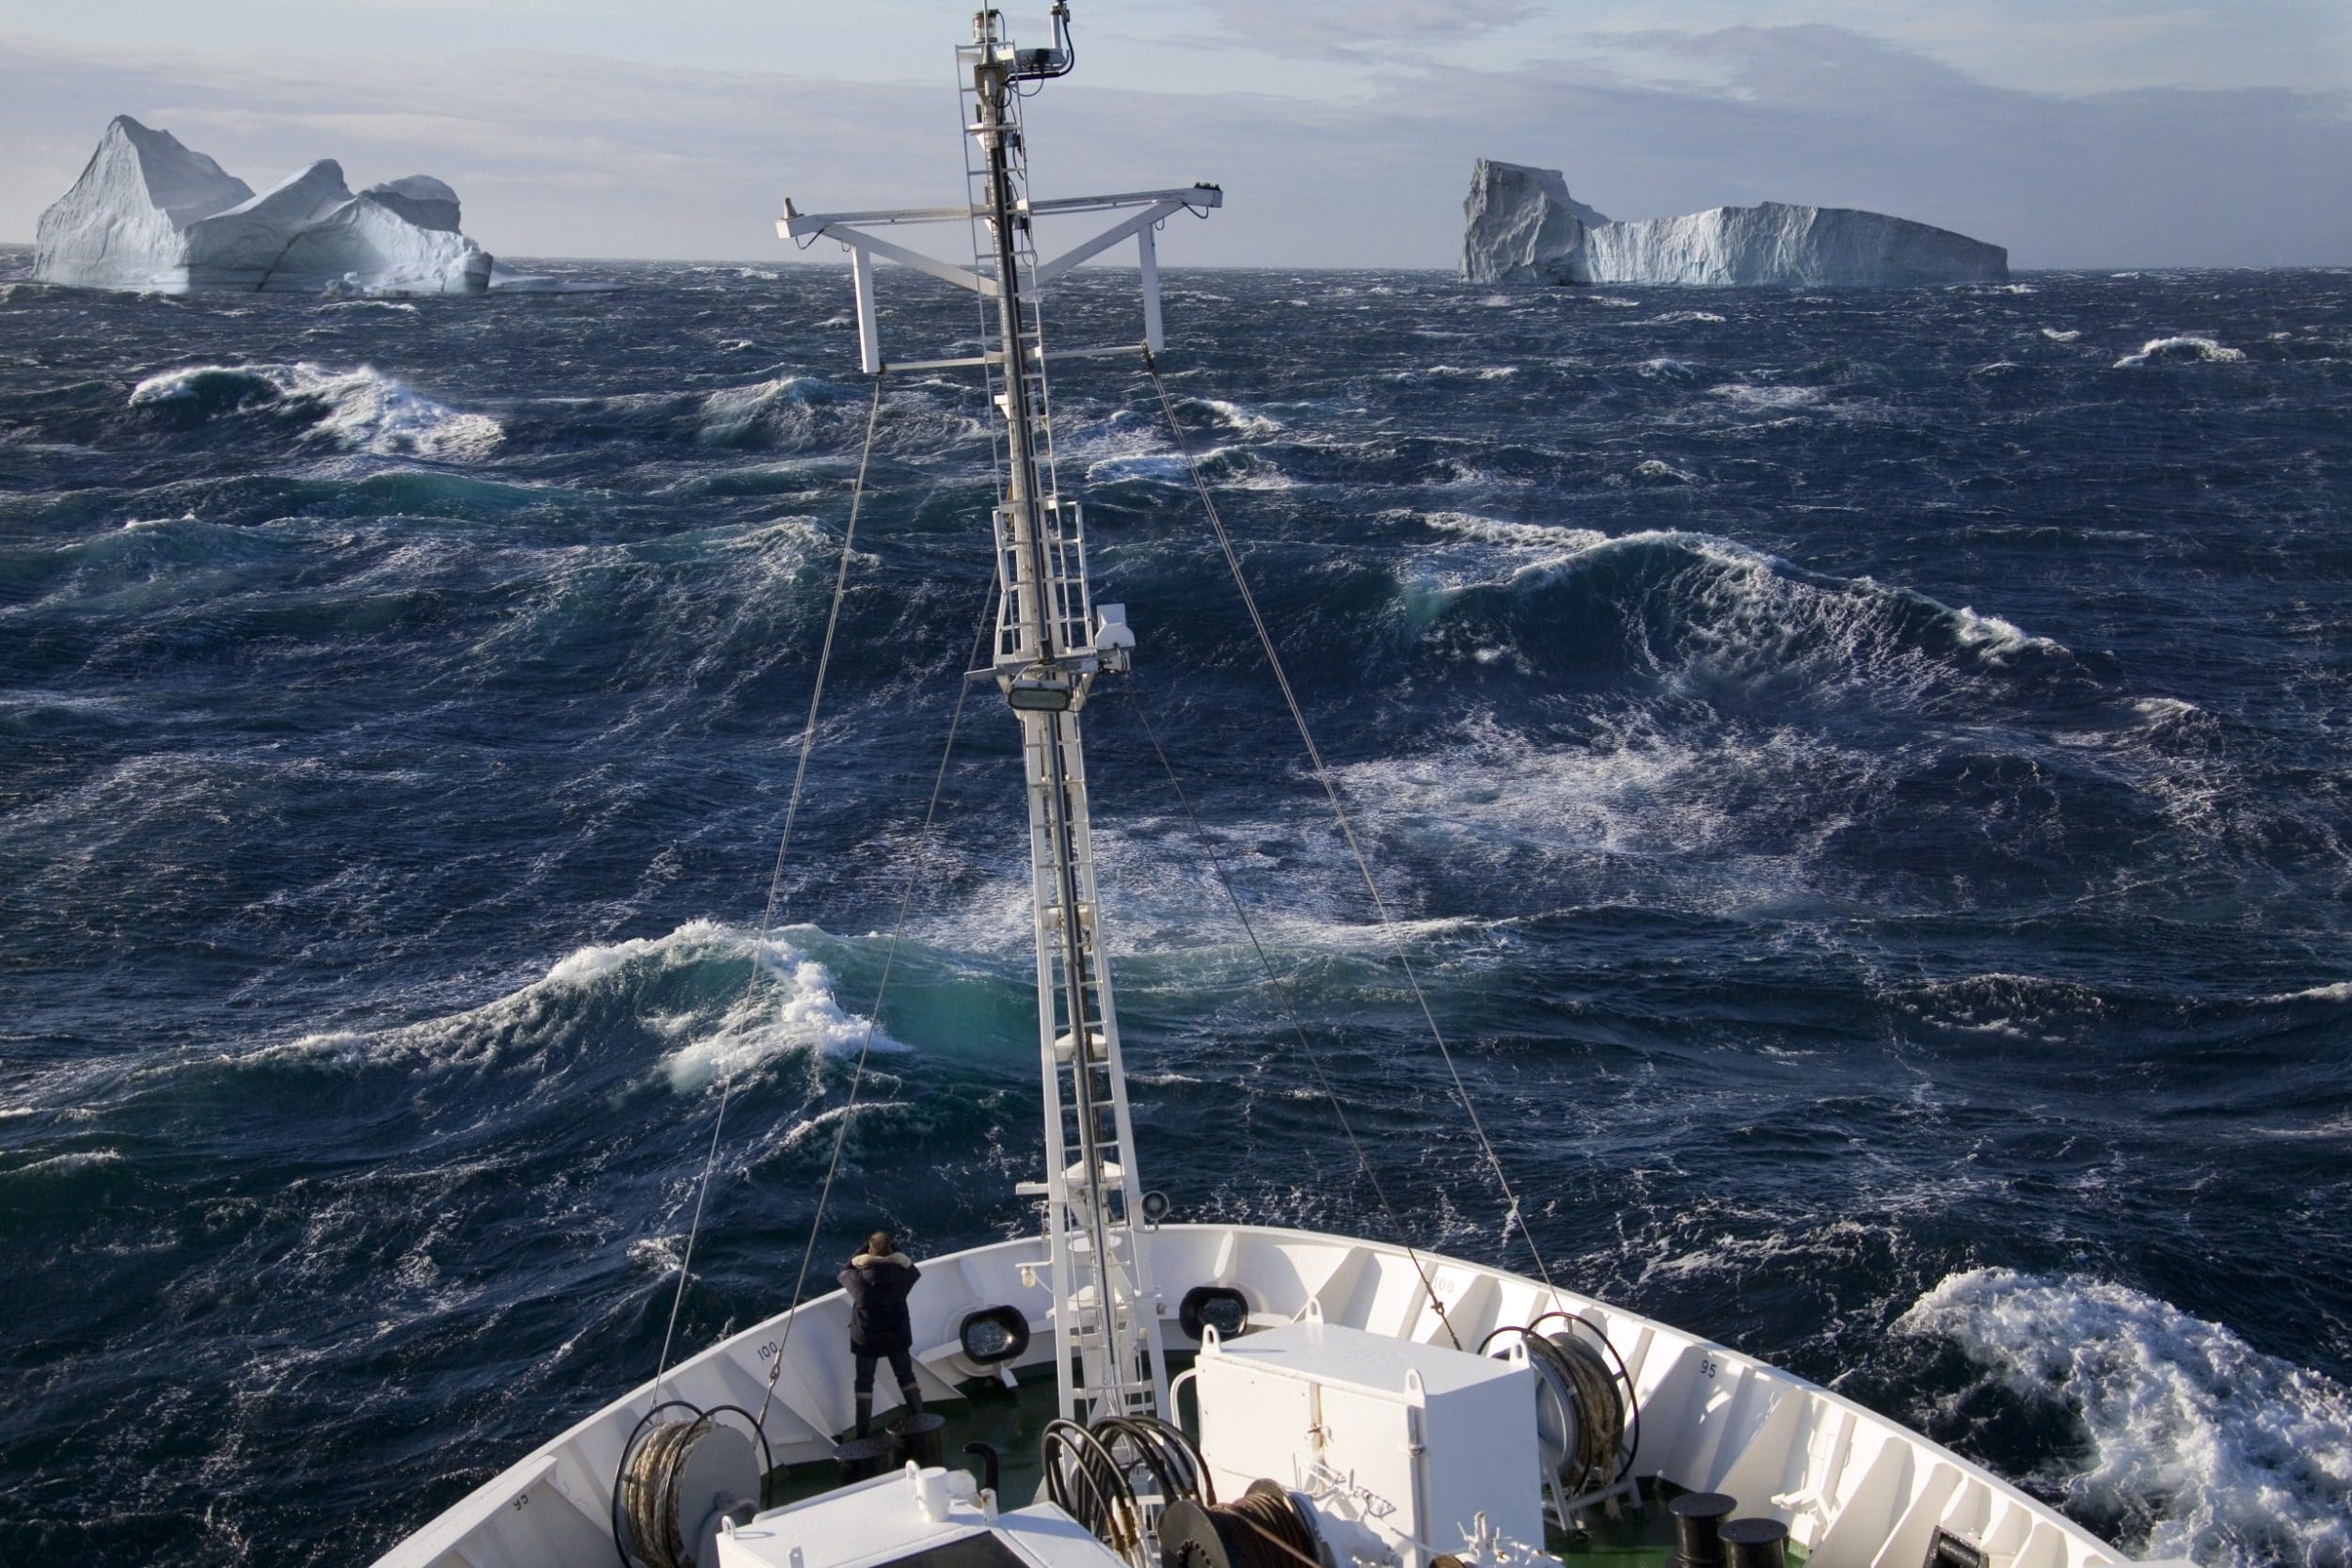 High vantage point image of man standing on the bow of a lage ocean going vessel against a background of rough seas